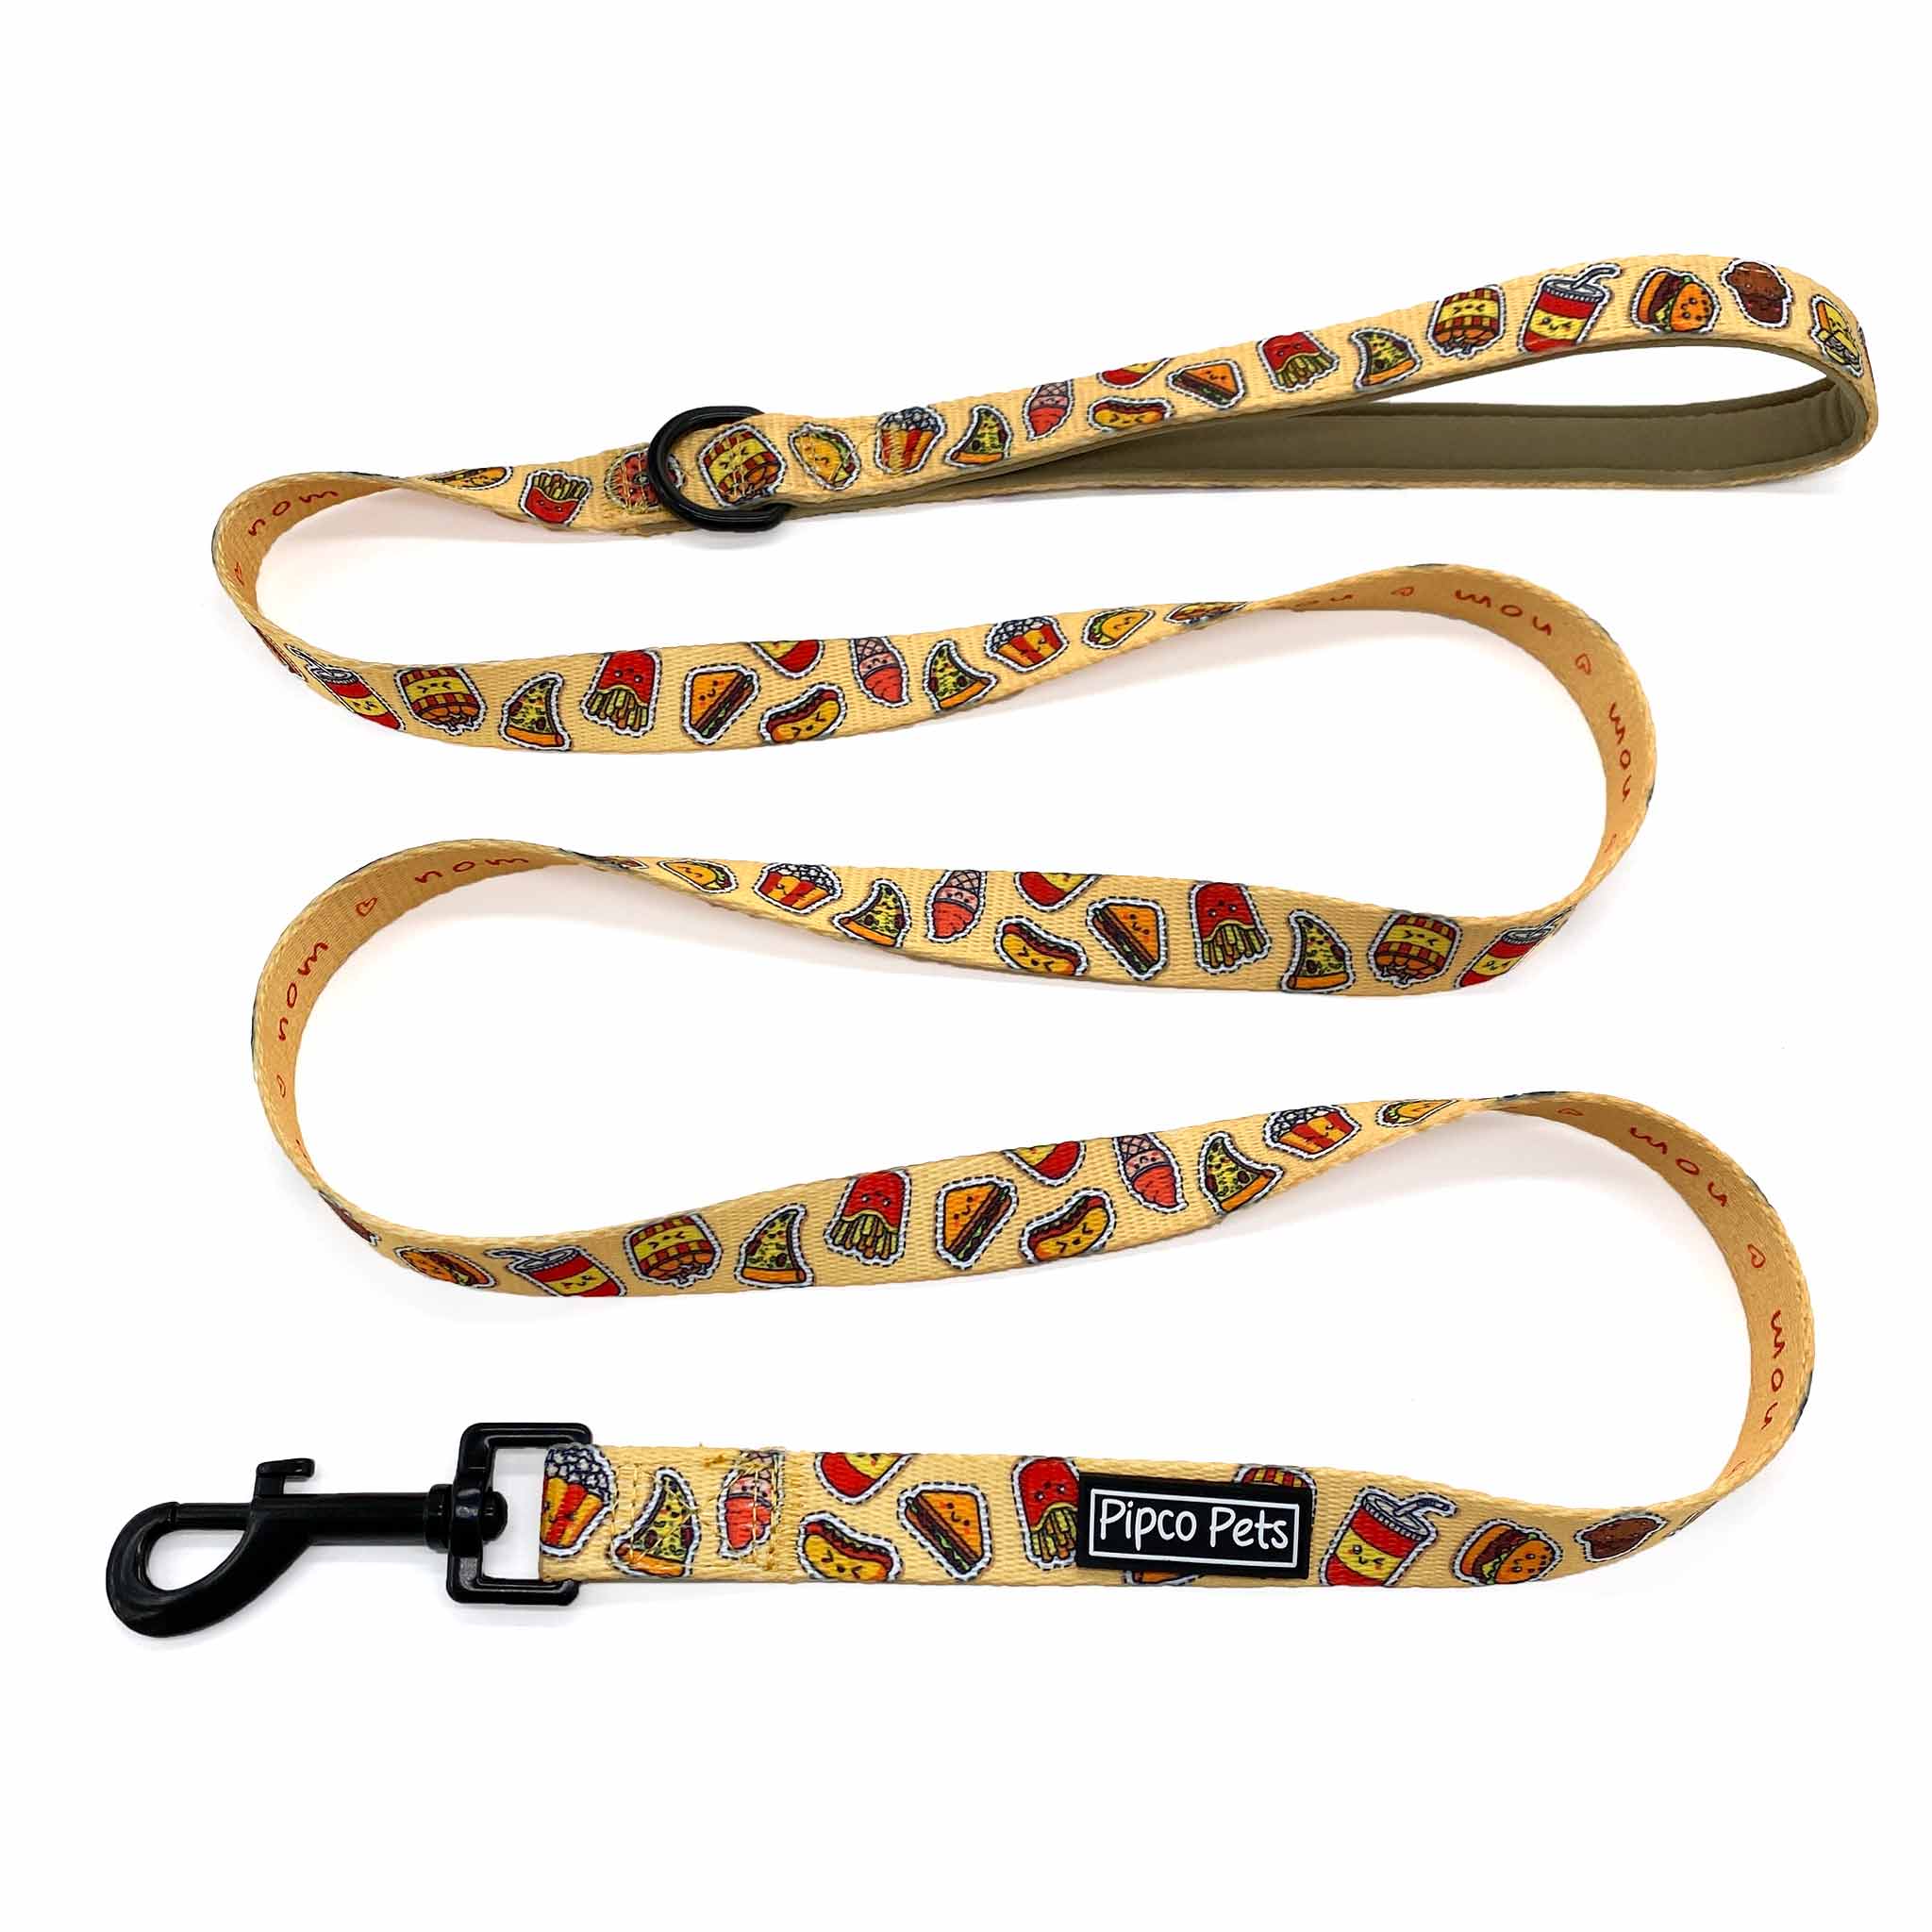 Pipco Pets dog leash with Snack Pack junk food print pattern in yellow